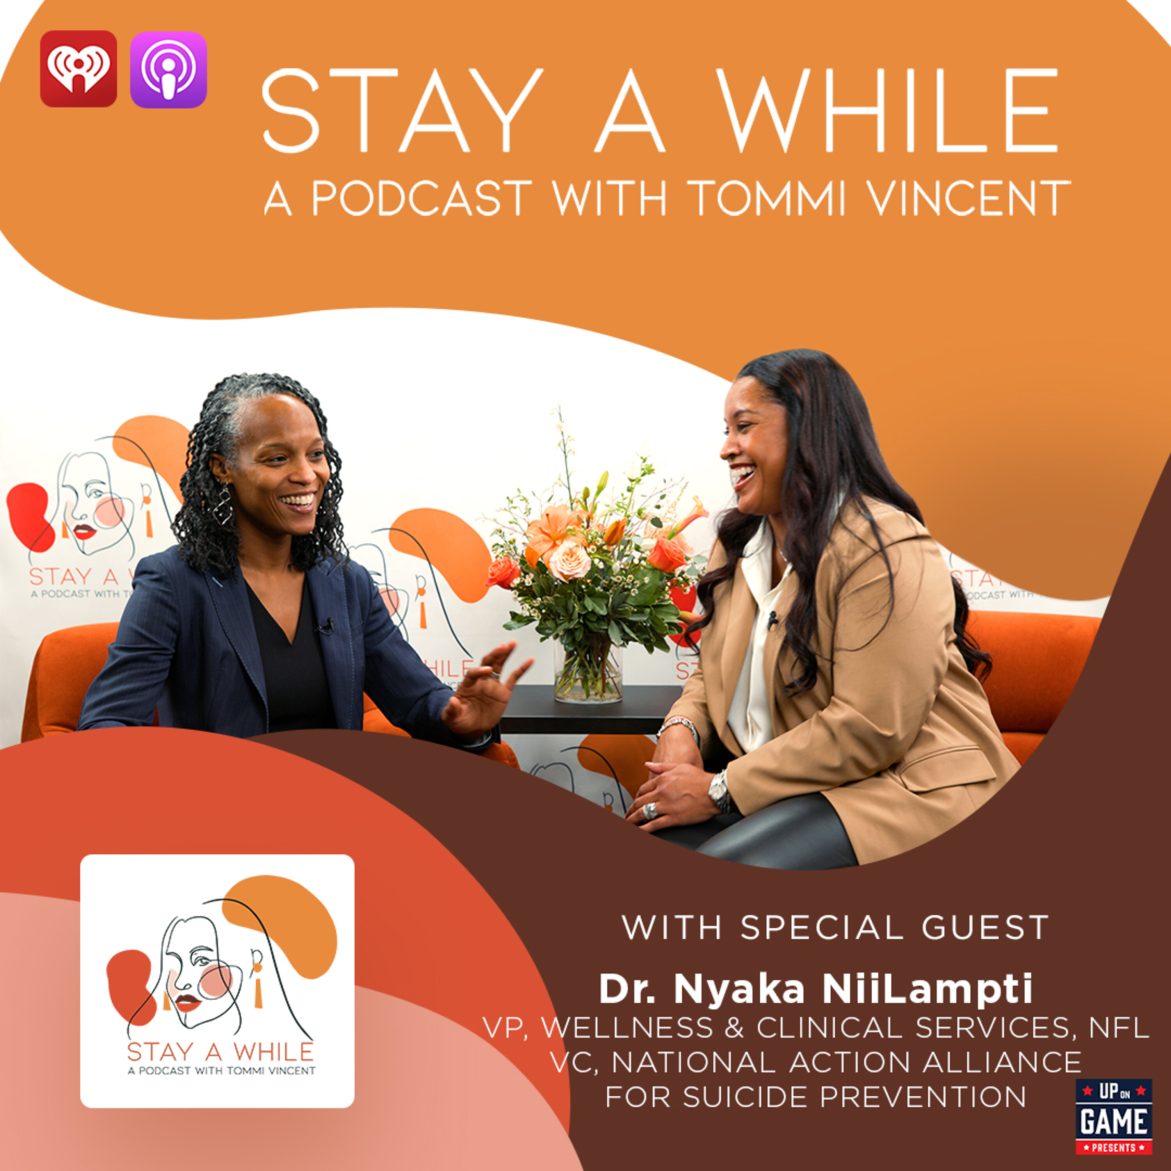 Black Podcasting - Up On Game Presents Stay A While Podcast With Tommi Vincent "The Scale of Mental Health" With Dr. Nyaka NiiLampti